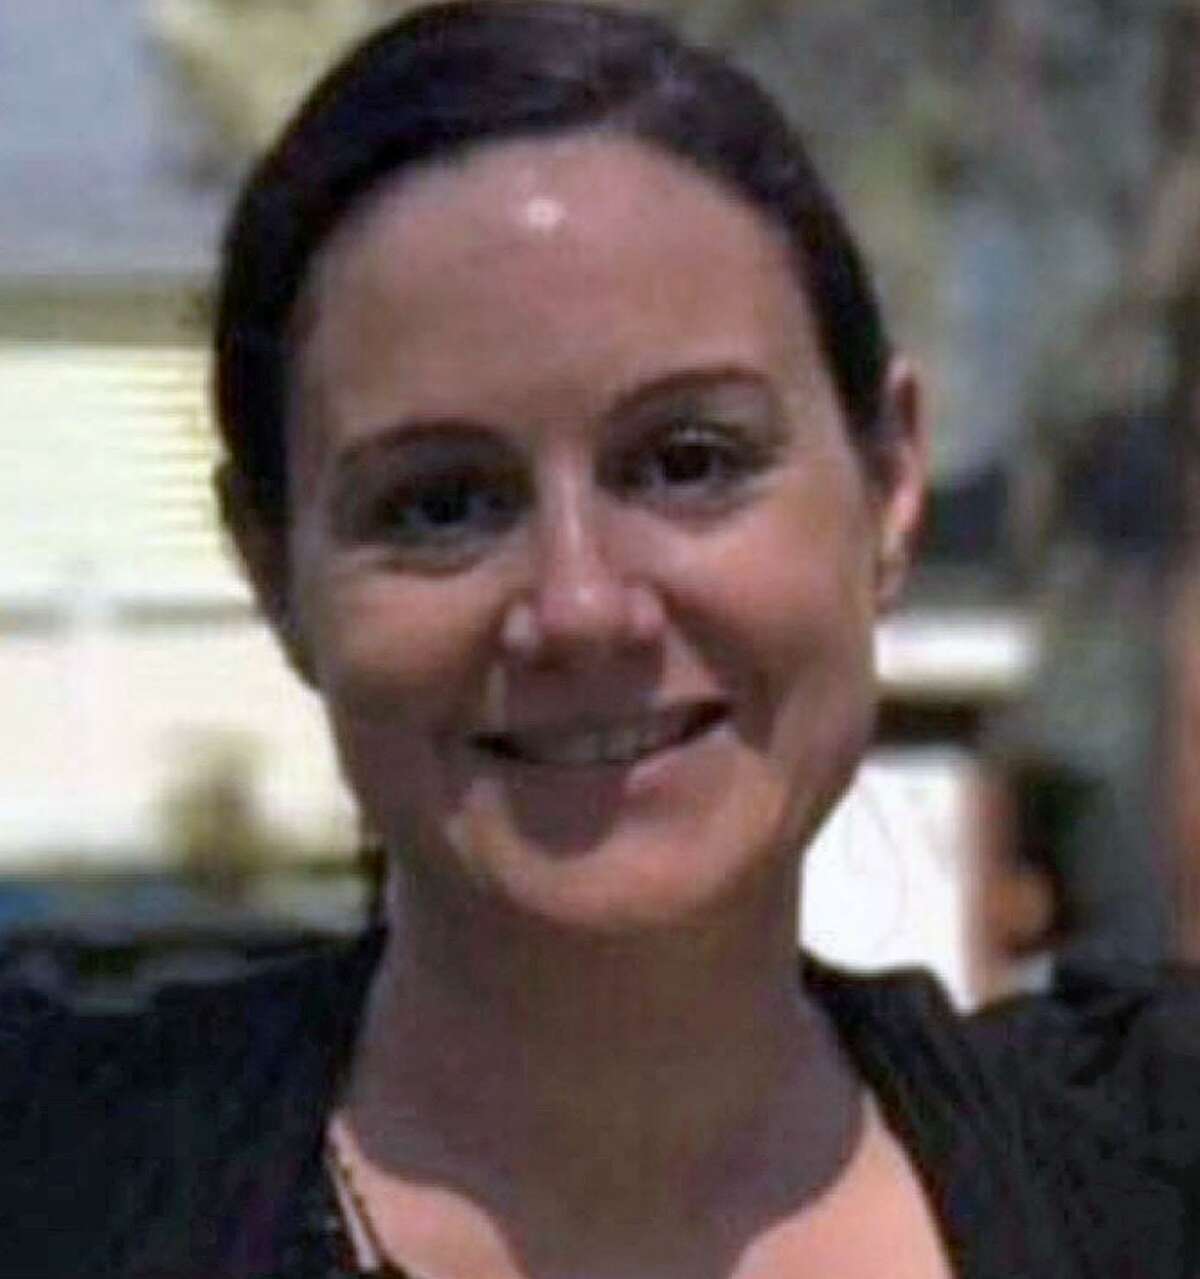 Anyone with information on the whereabouts of Kimberly Piccoli is asked to contact the Milford Police Department at 203-878-6551 or Detective William Haas at 203-783-4771 or whaas@ci.milford.ct.us in reference to case number 3228-17.